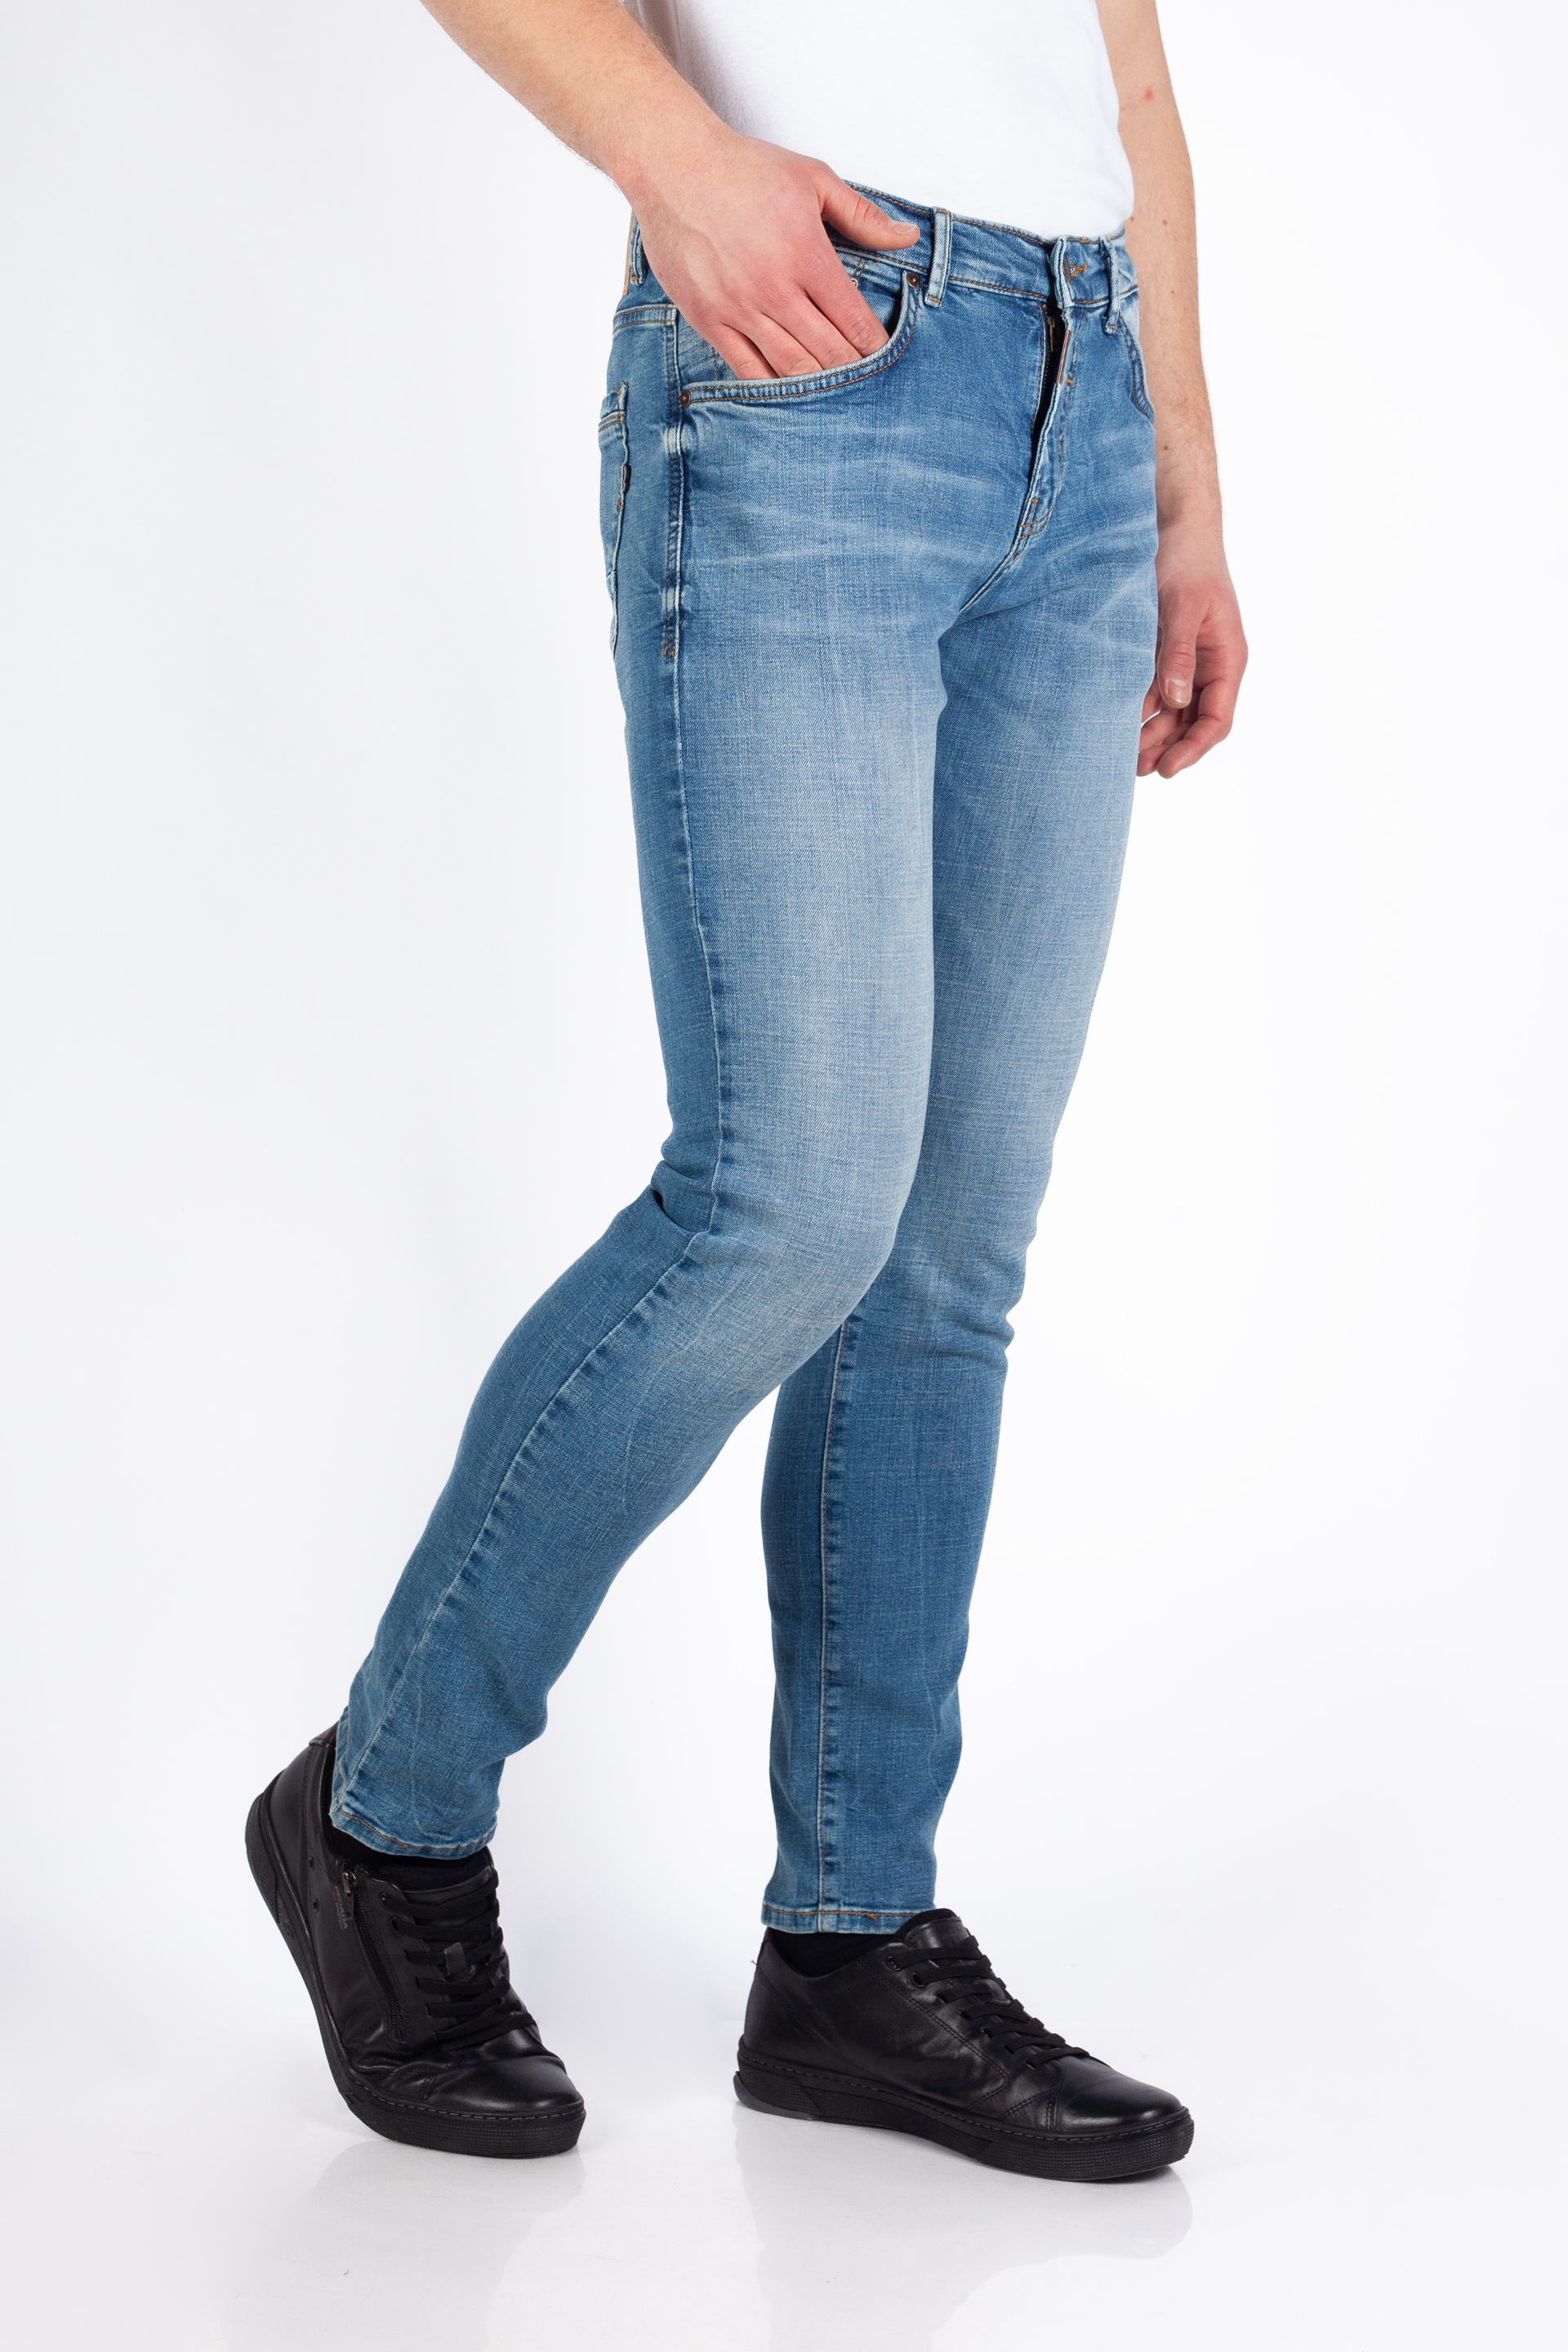 Jeans LTB JEANS 1009-51586-15634-55006